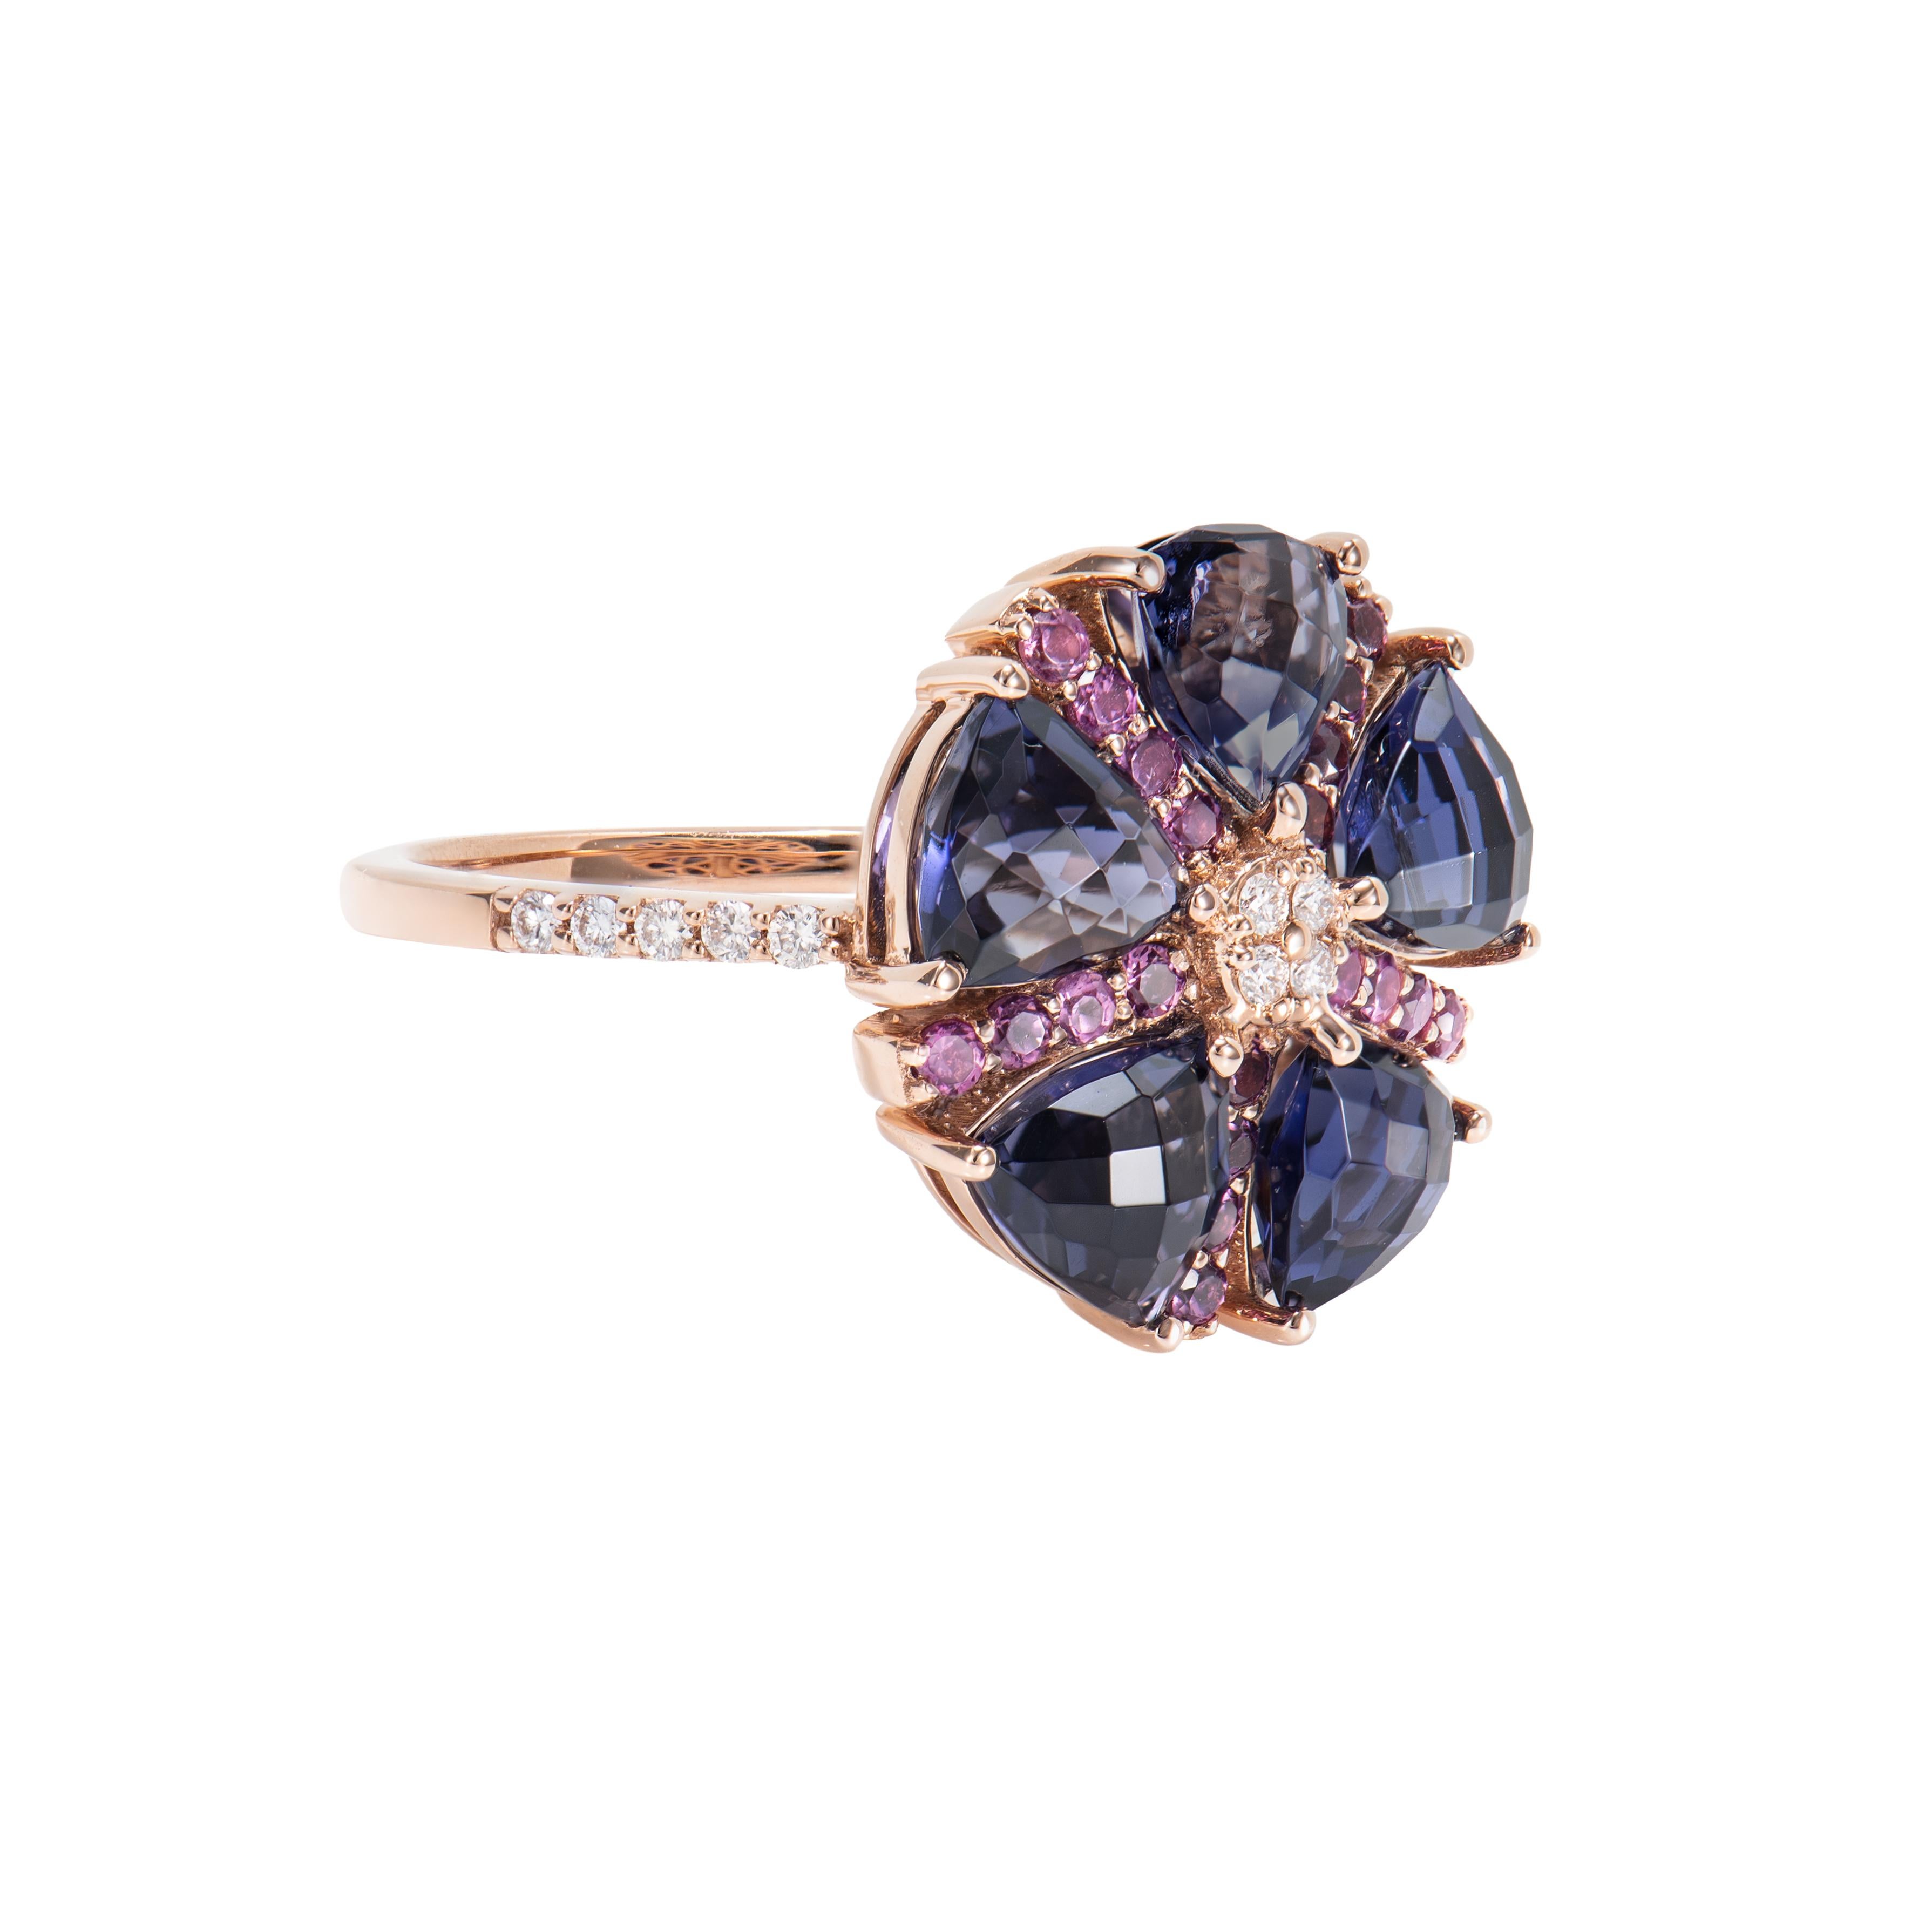 These are fancy iolite Ring in a trillion shape with purple hue. The Ring is elegant and can be worn for many occasions. 

Iolite Fancy Ring in 18 Karat Rose Gold with Rhodolite and White Diamond.

Iolite: 3.56 carat, 5.50mm size, Trillion